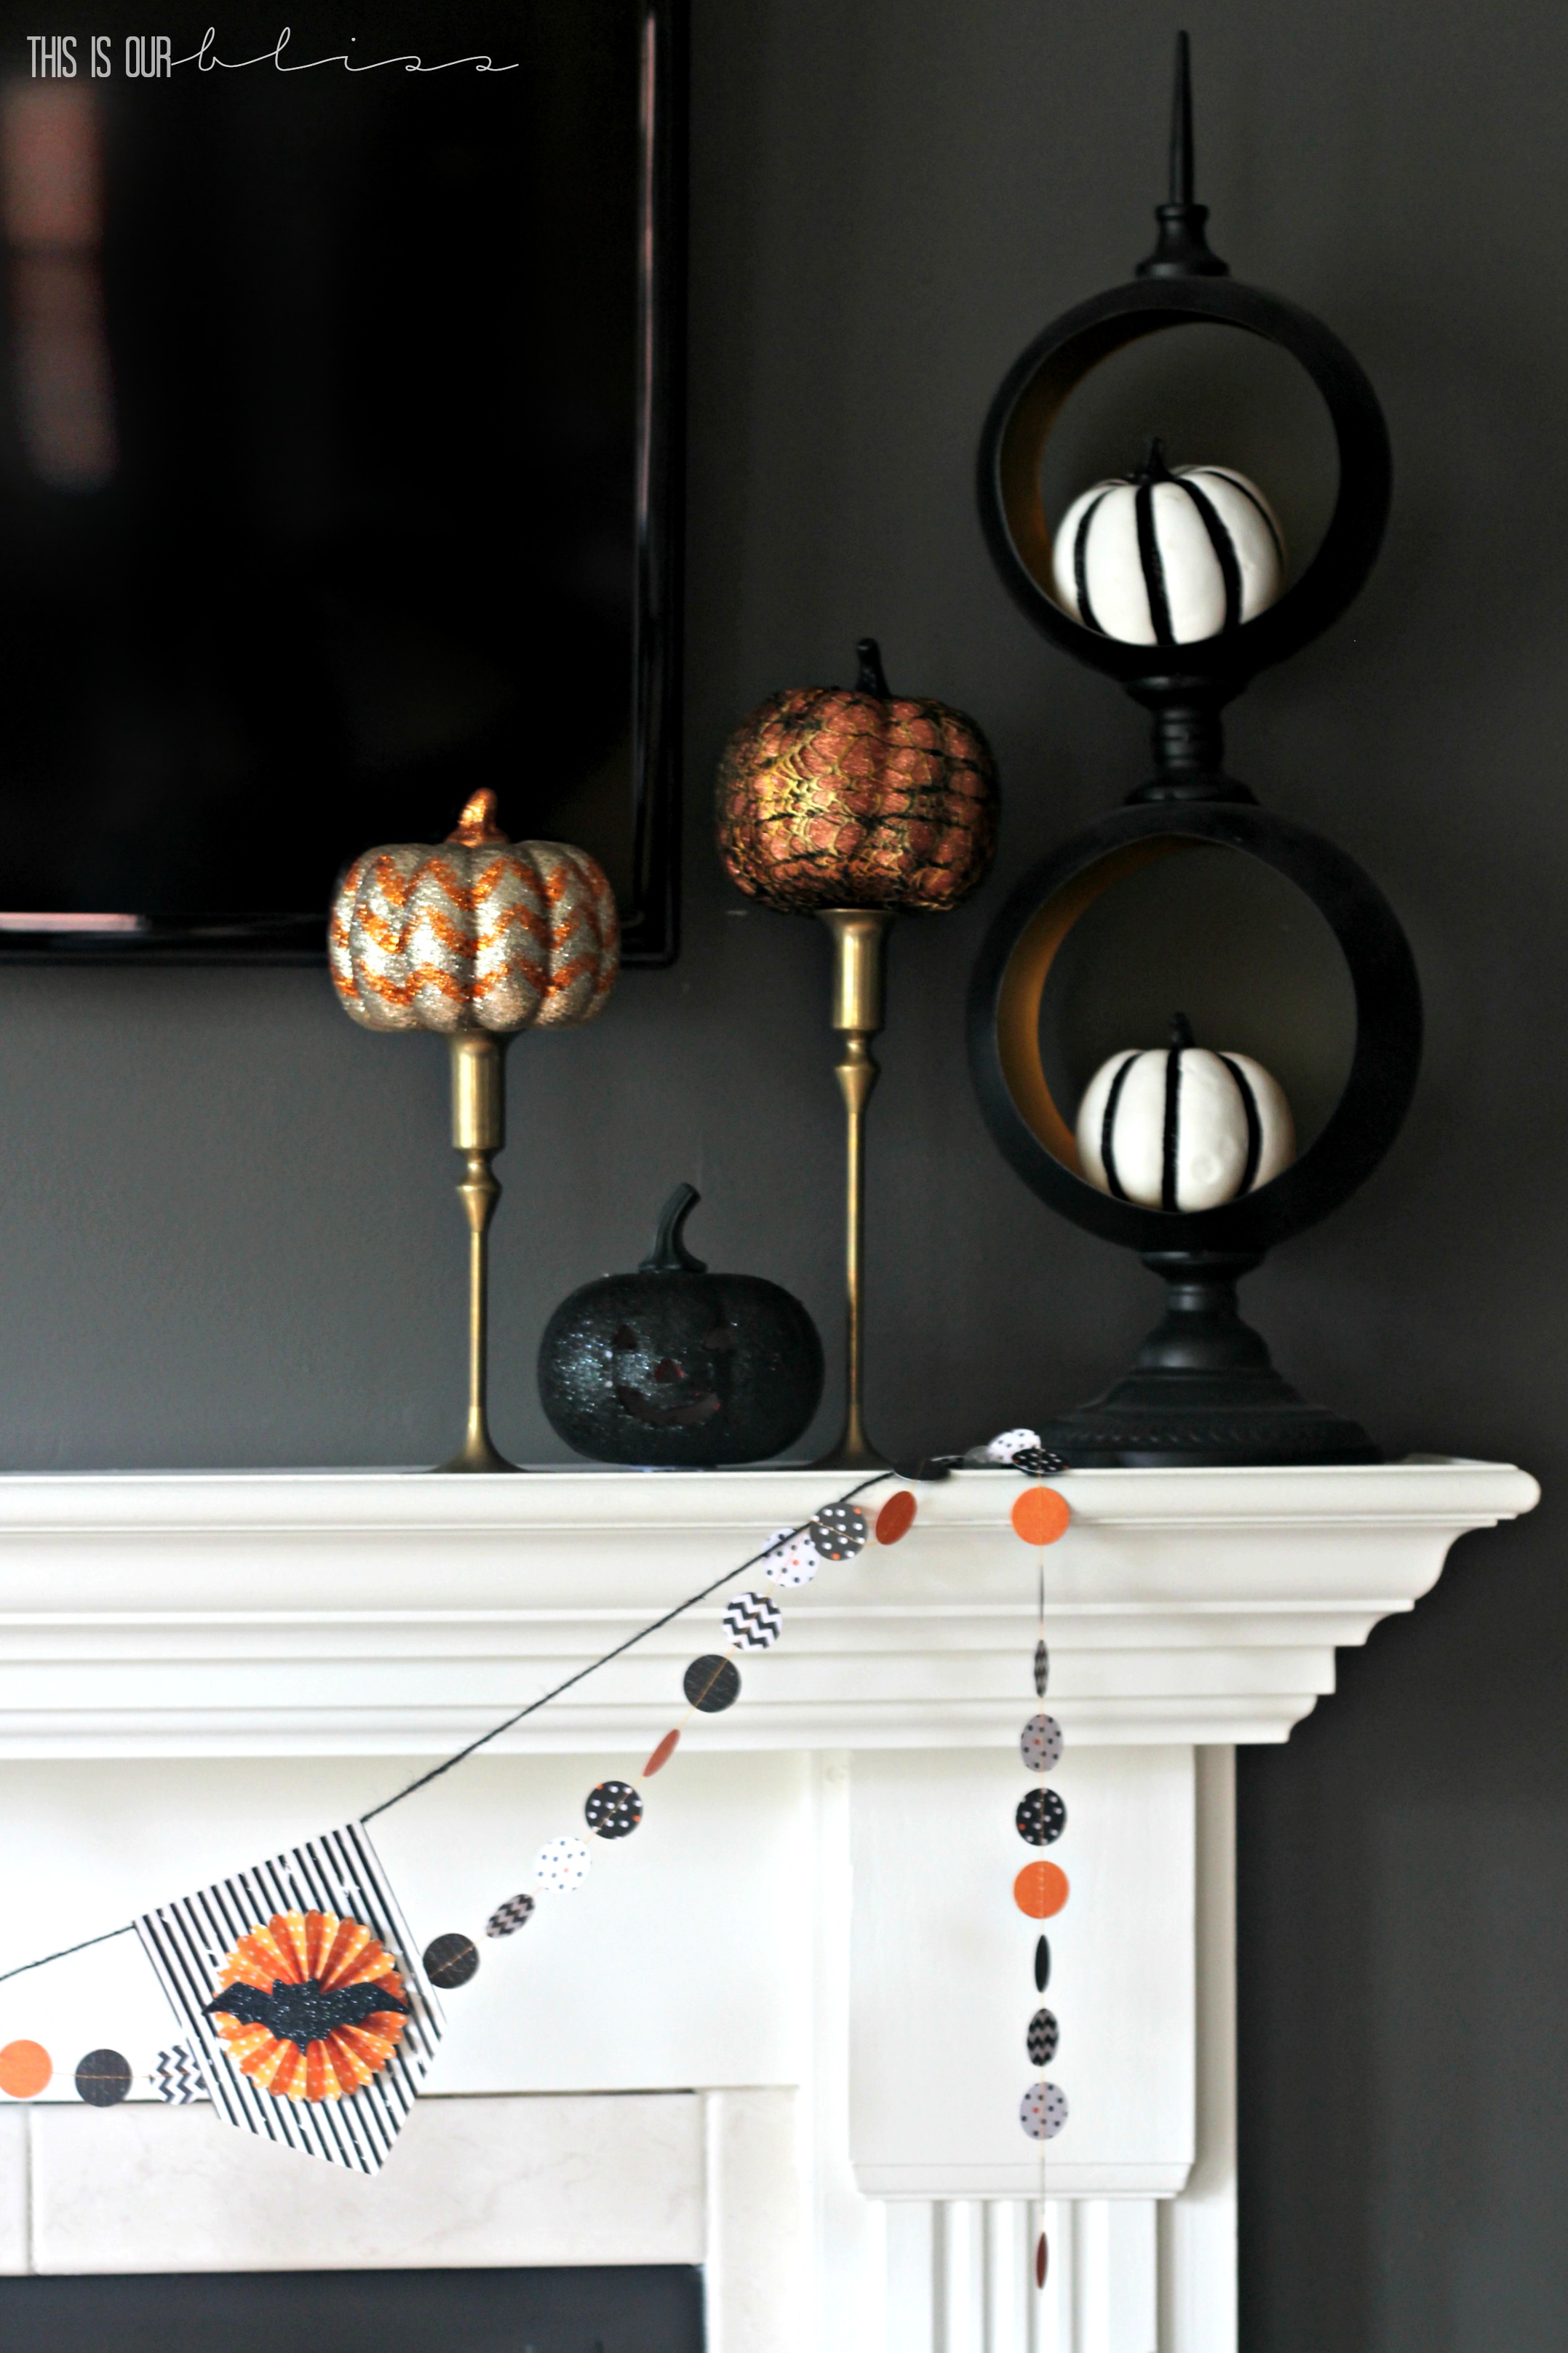 [Last-Minute Decorating] Simple Halloween Mantel - This is our Bliss